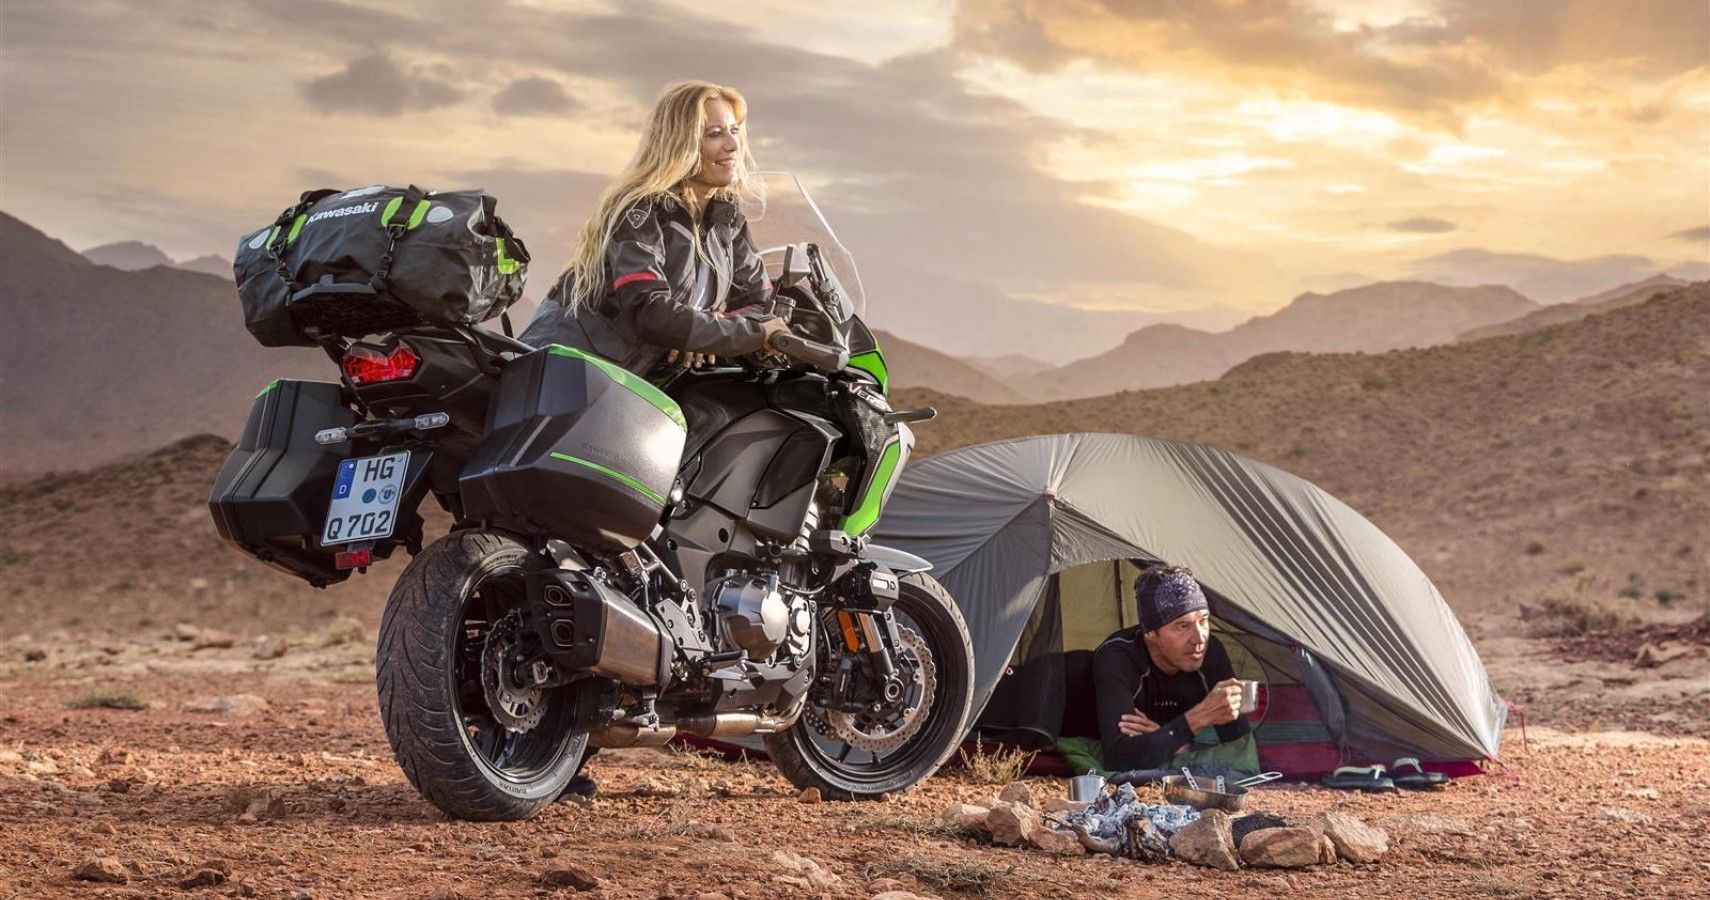 2022 Kawasaki Versys 1000 is made for no roads as well